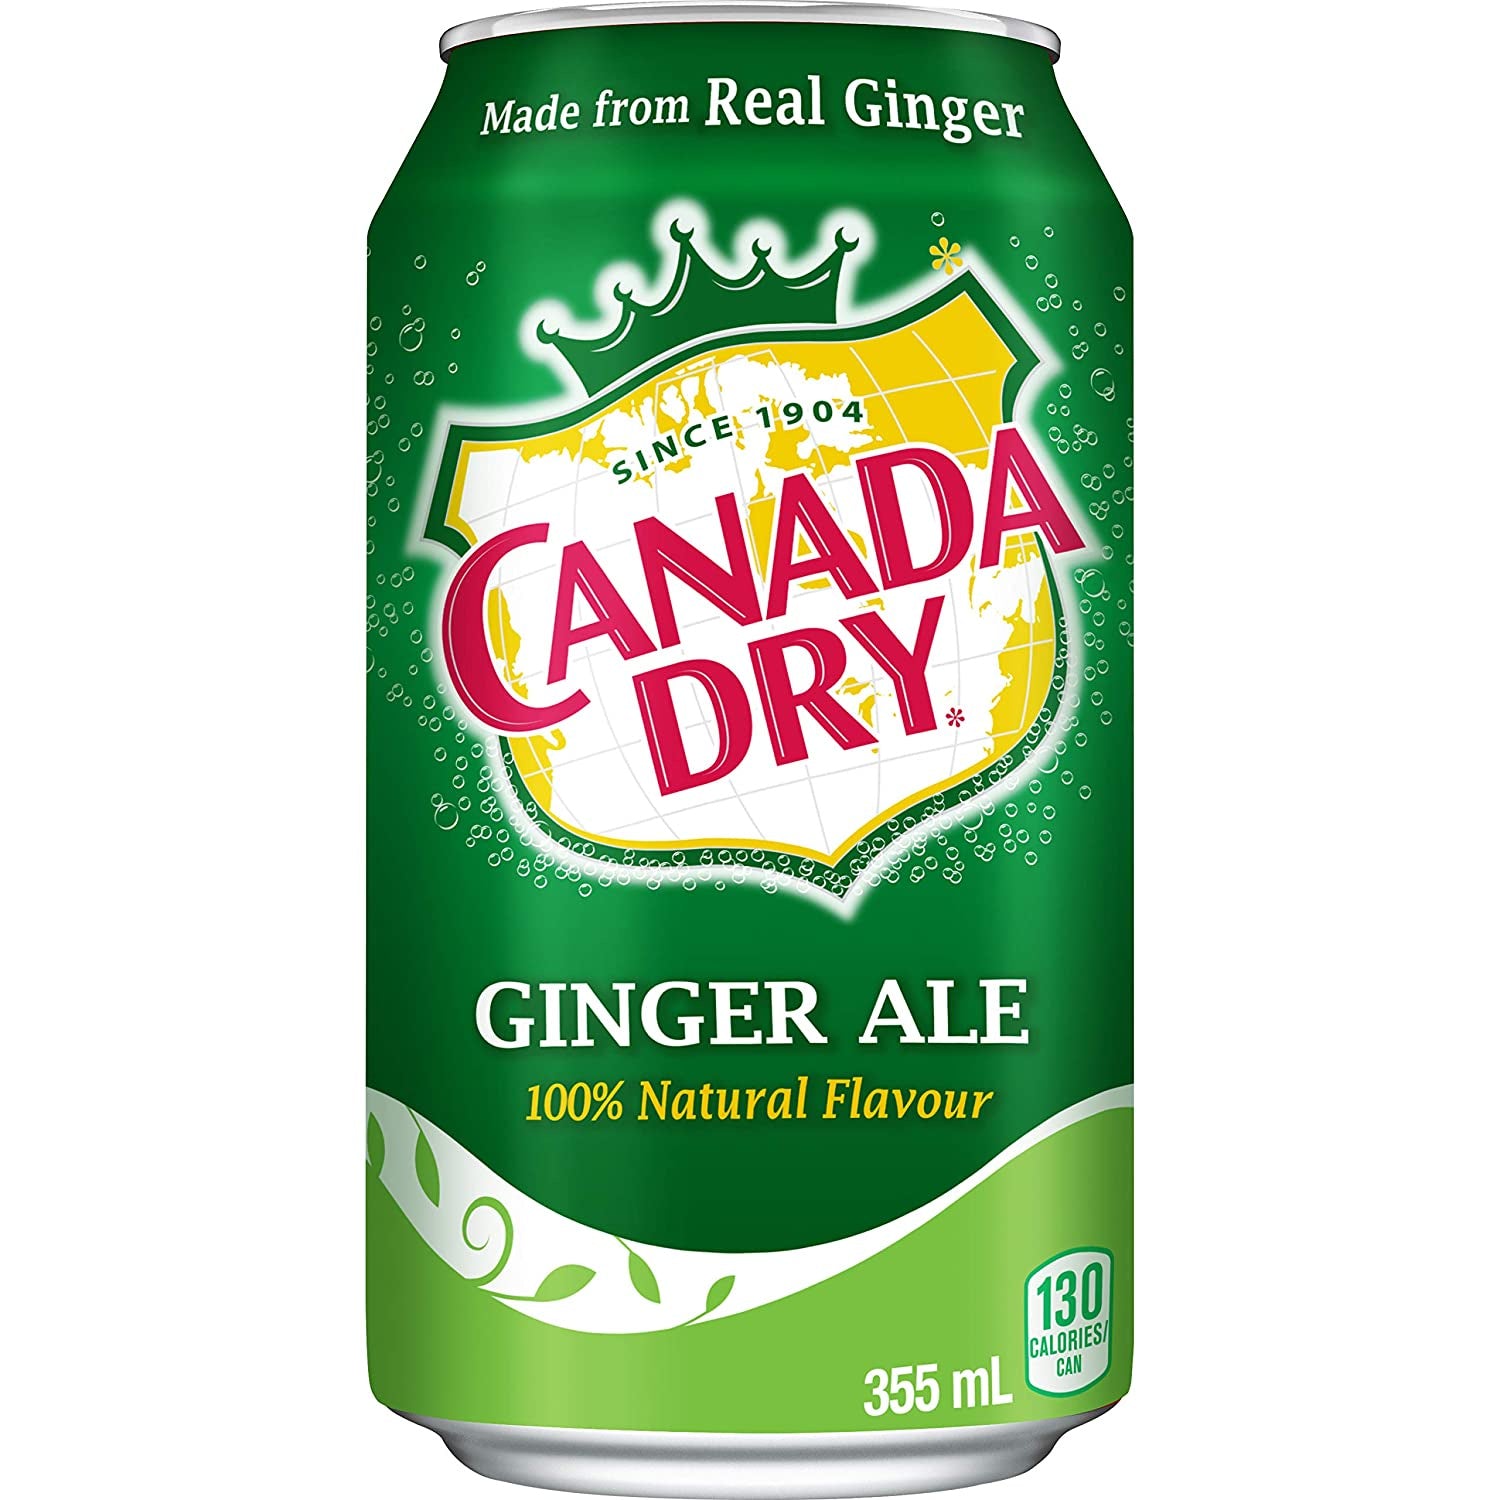 CANADA DRY Ginger Ale 355 ml can